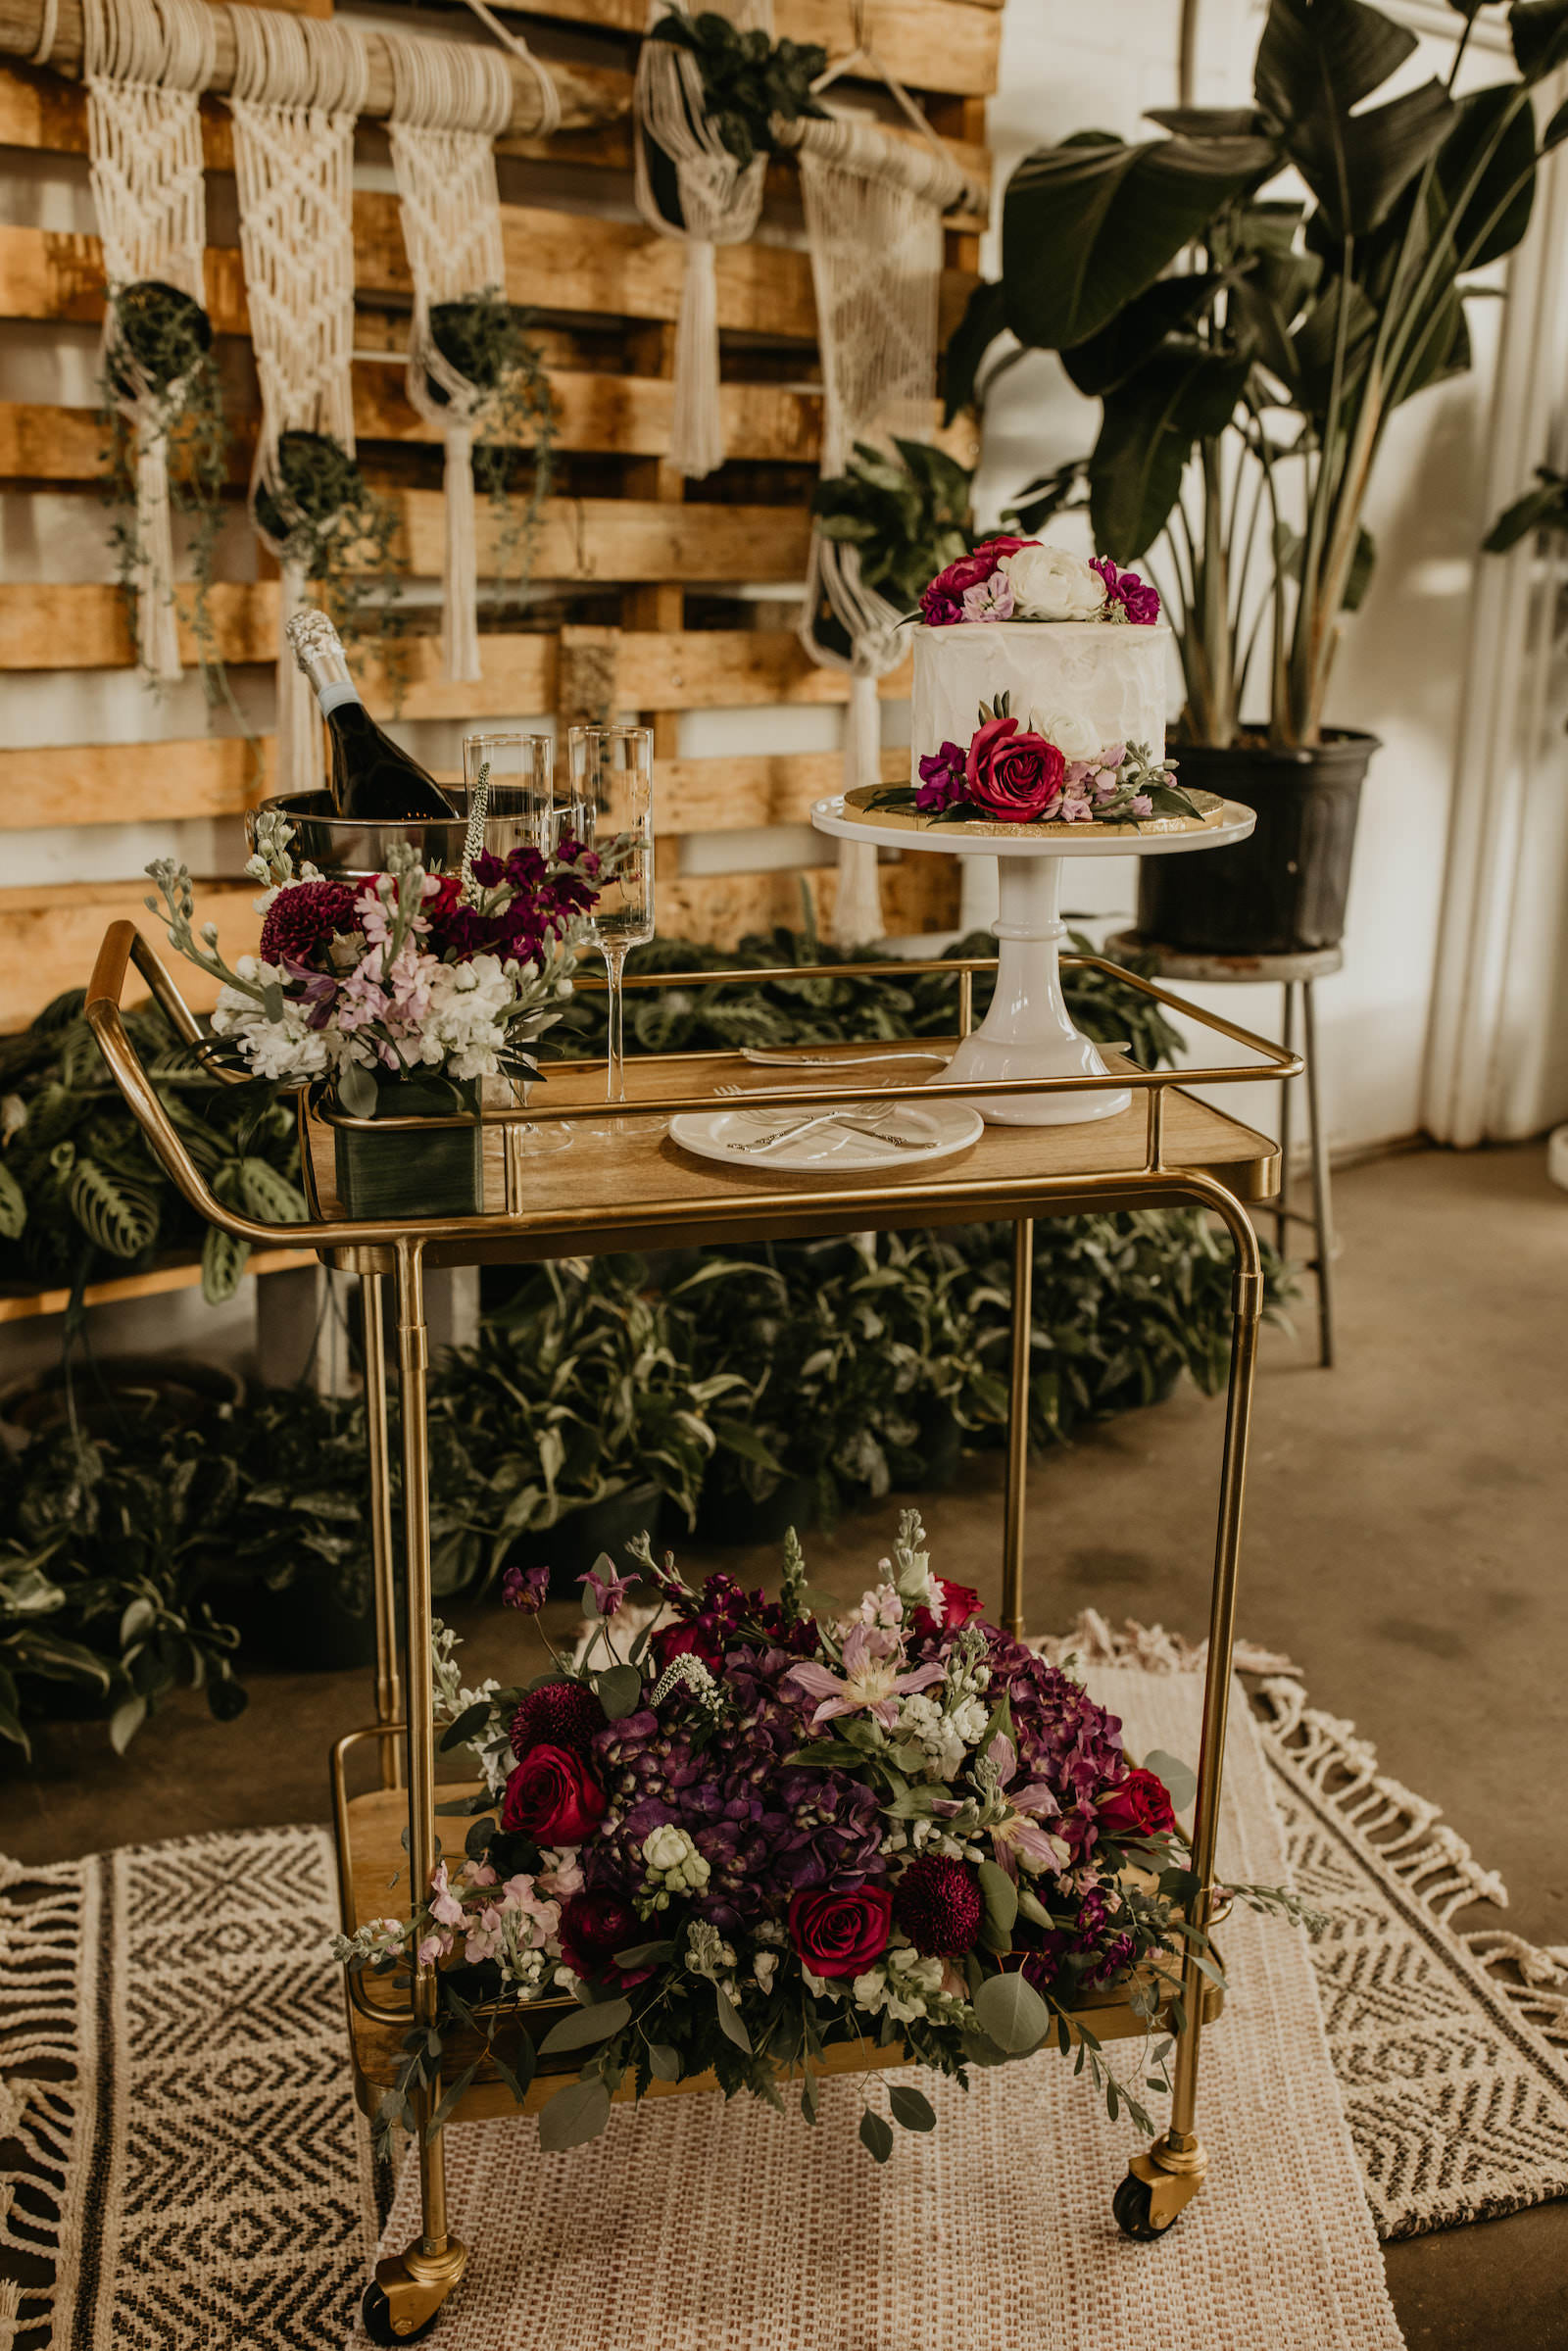 Intimate Elopement Wedding, Vintage Gold Bar Cart with Boho Purple, Red and Pink Florals and Eucalyptus Greenery Bouquet, One Tier White Wedding Cake with Flowers | Tampa Bay Wedding Planner Elope Tampa Bay | Unique Plant Shop Wedding Venue Wild Roots